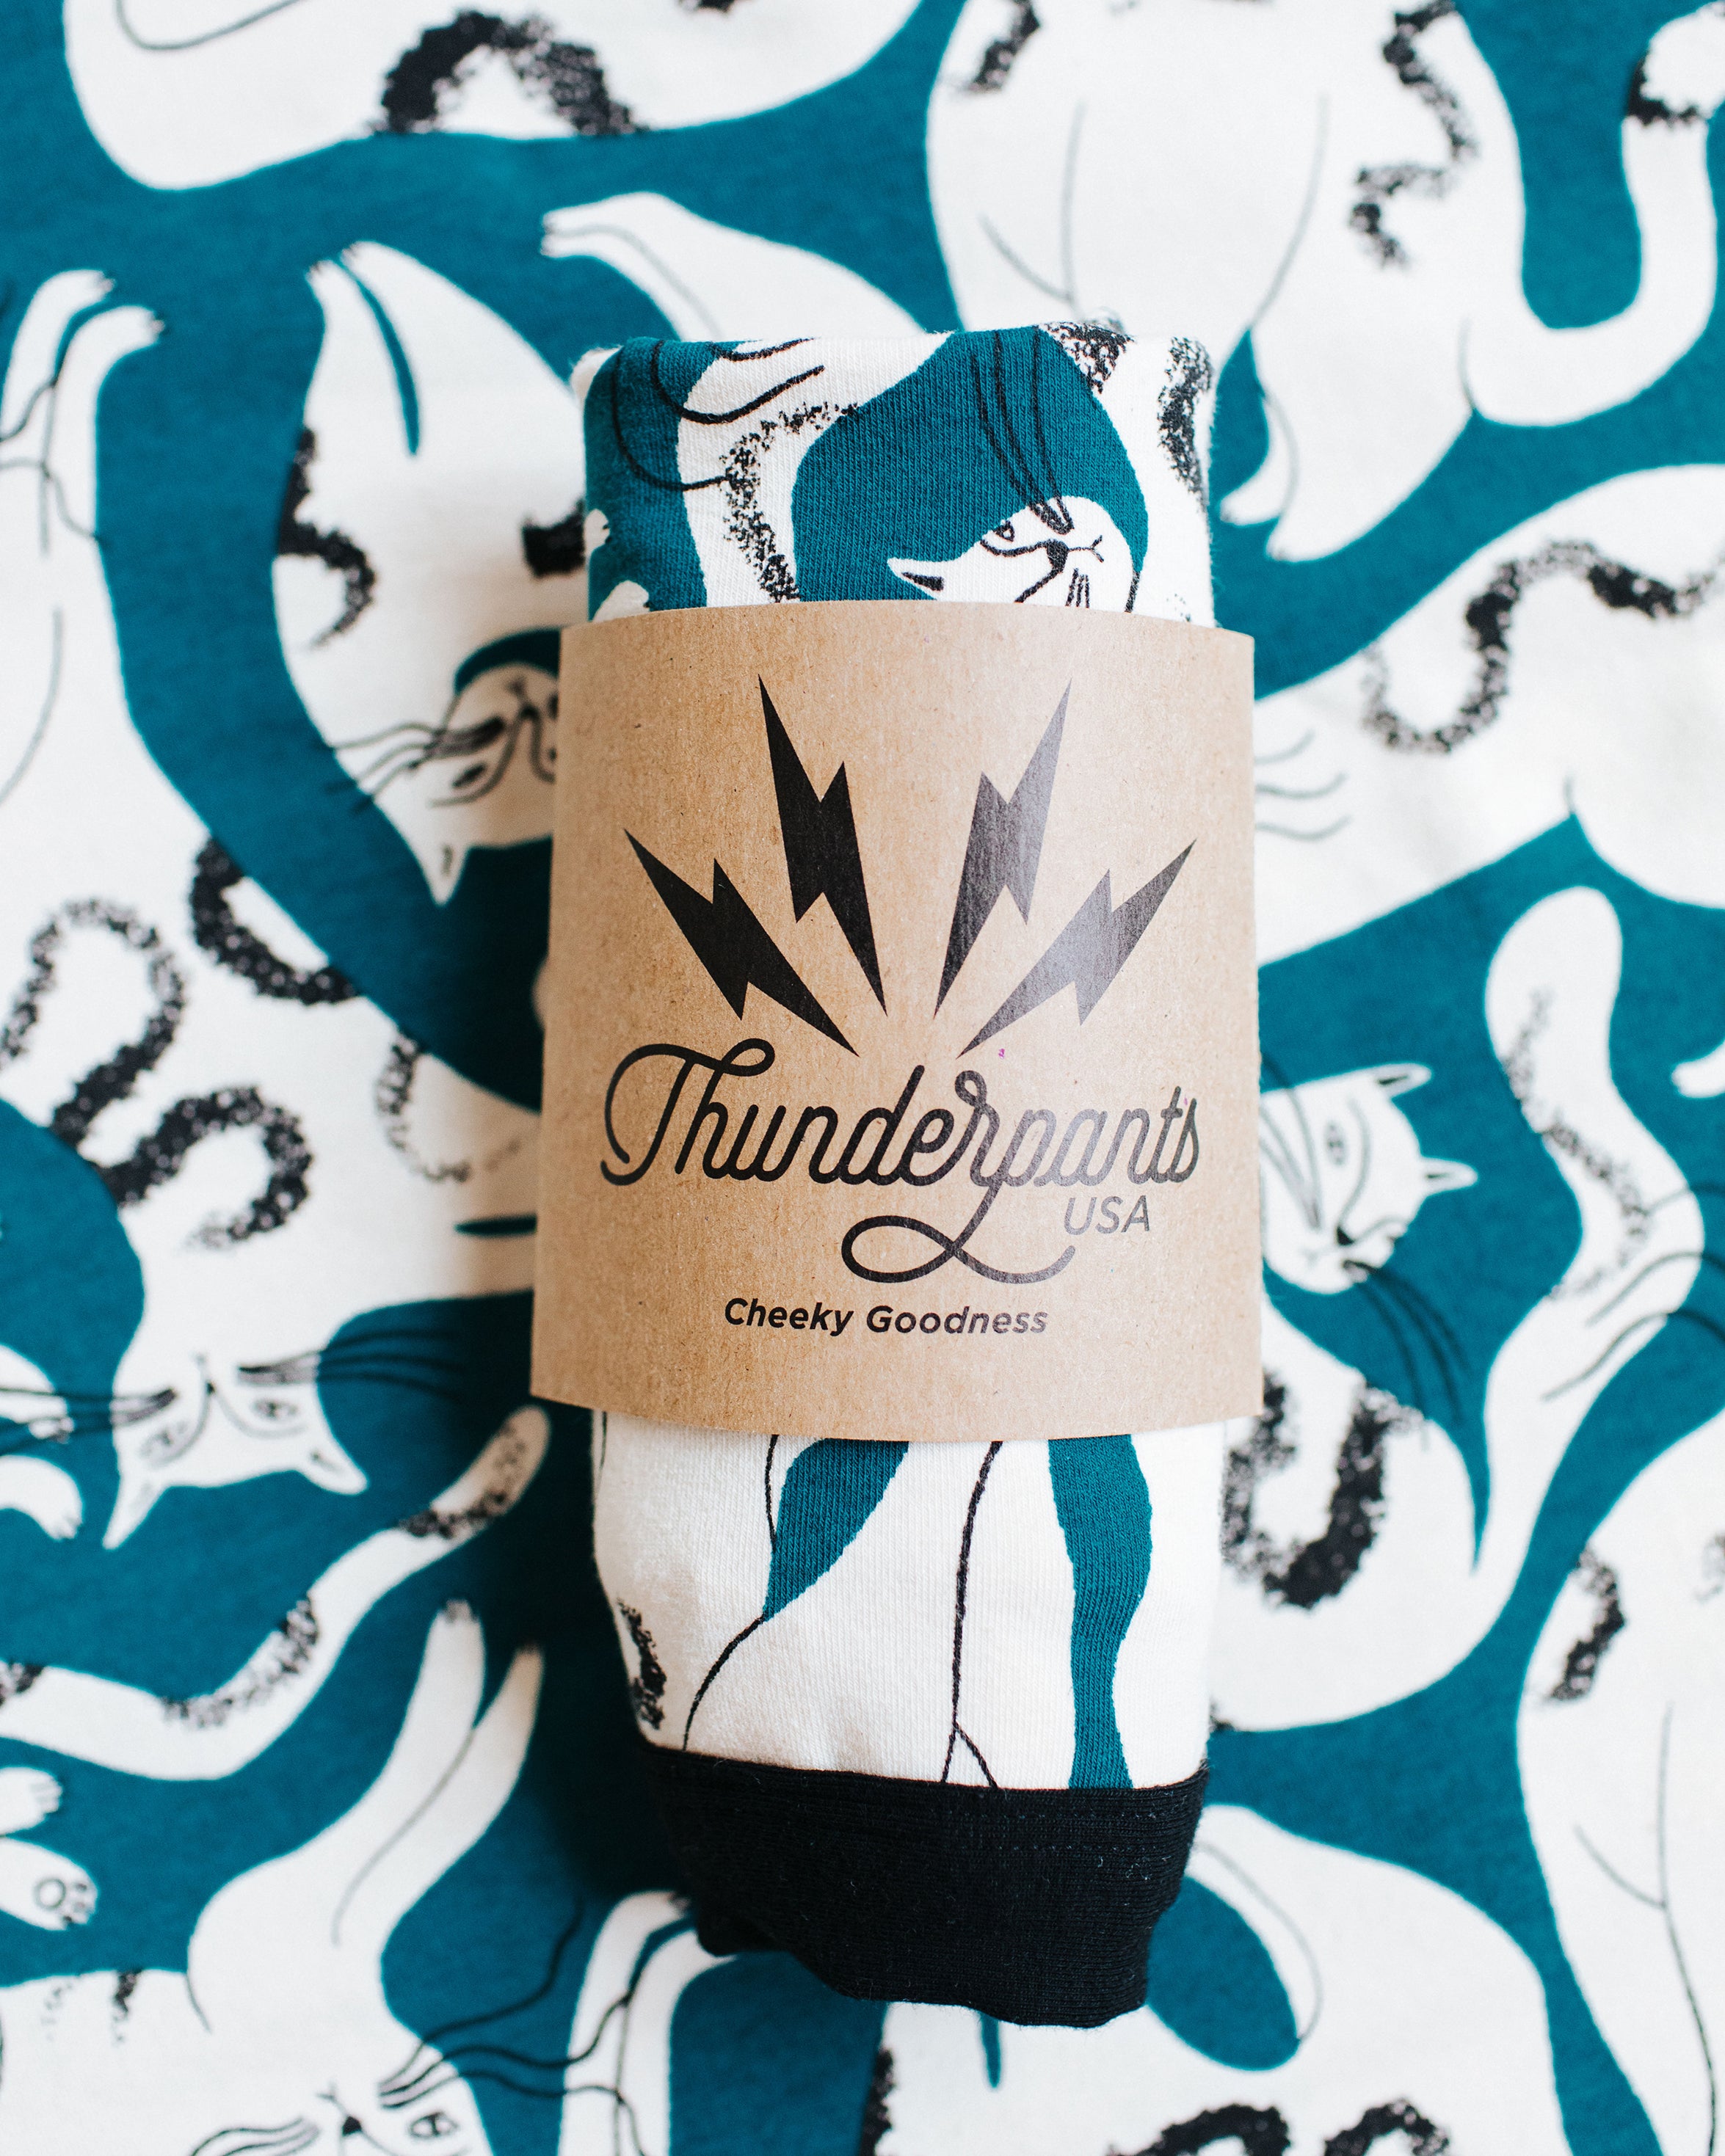 Flat lay of packaged Thunderpants underwear in Hey Meow! print - green with white cats.